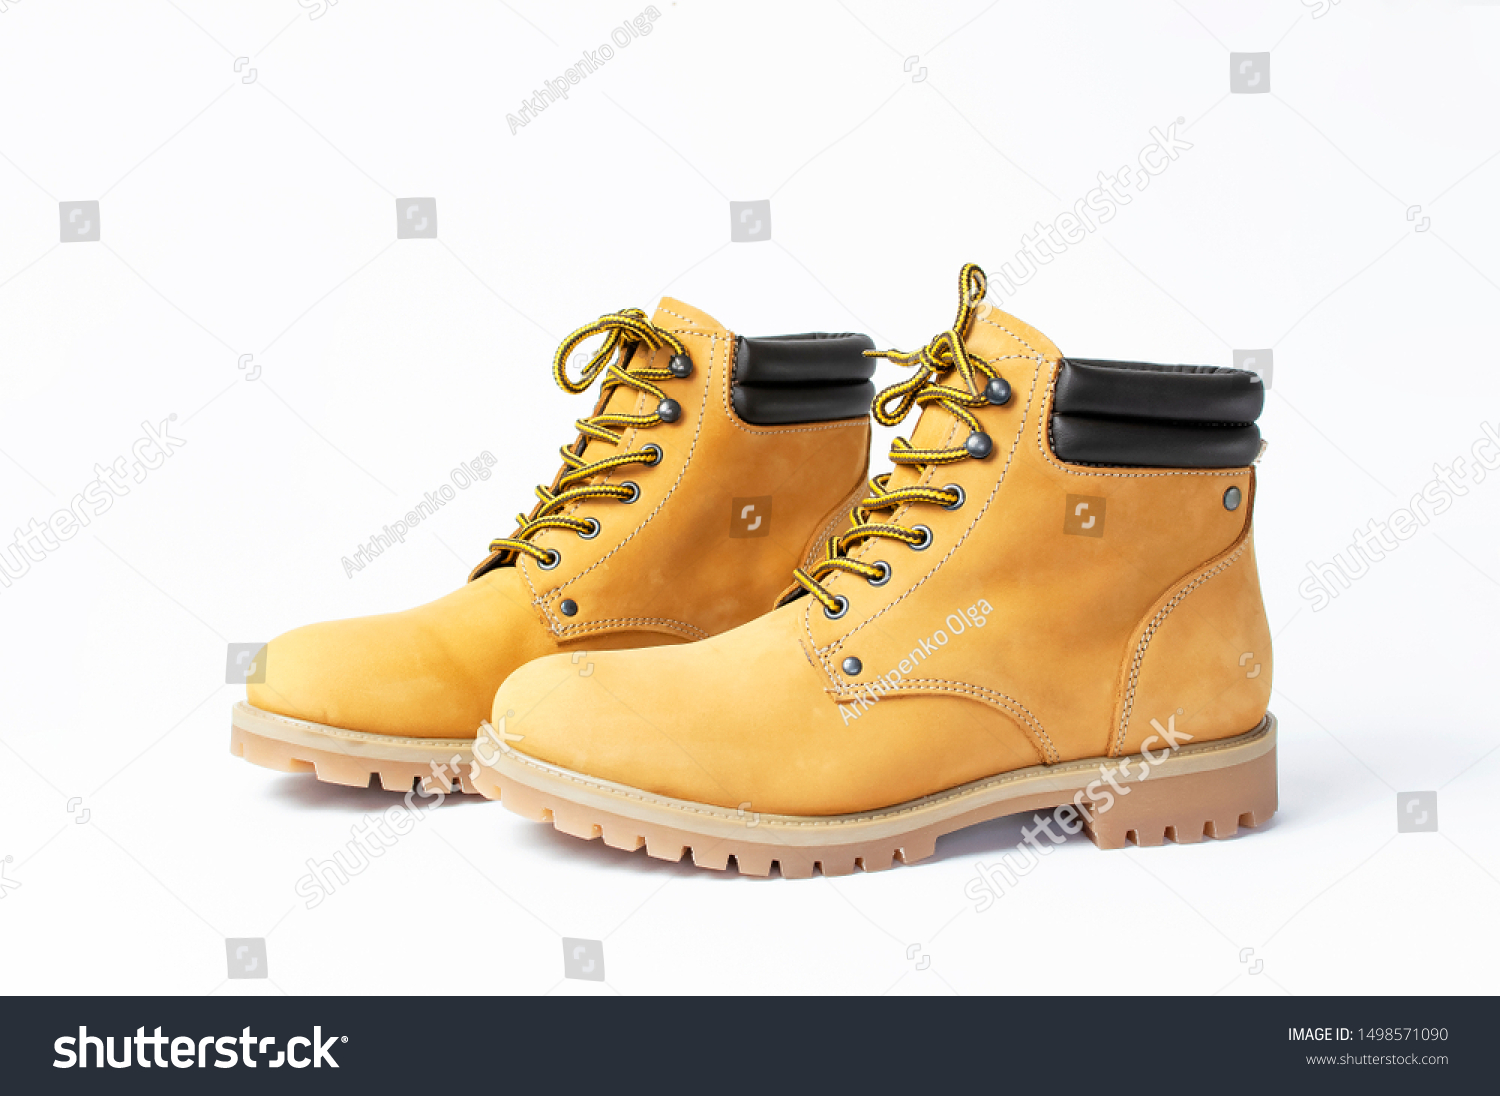 yellow winter shoes